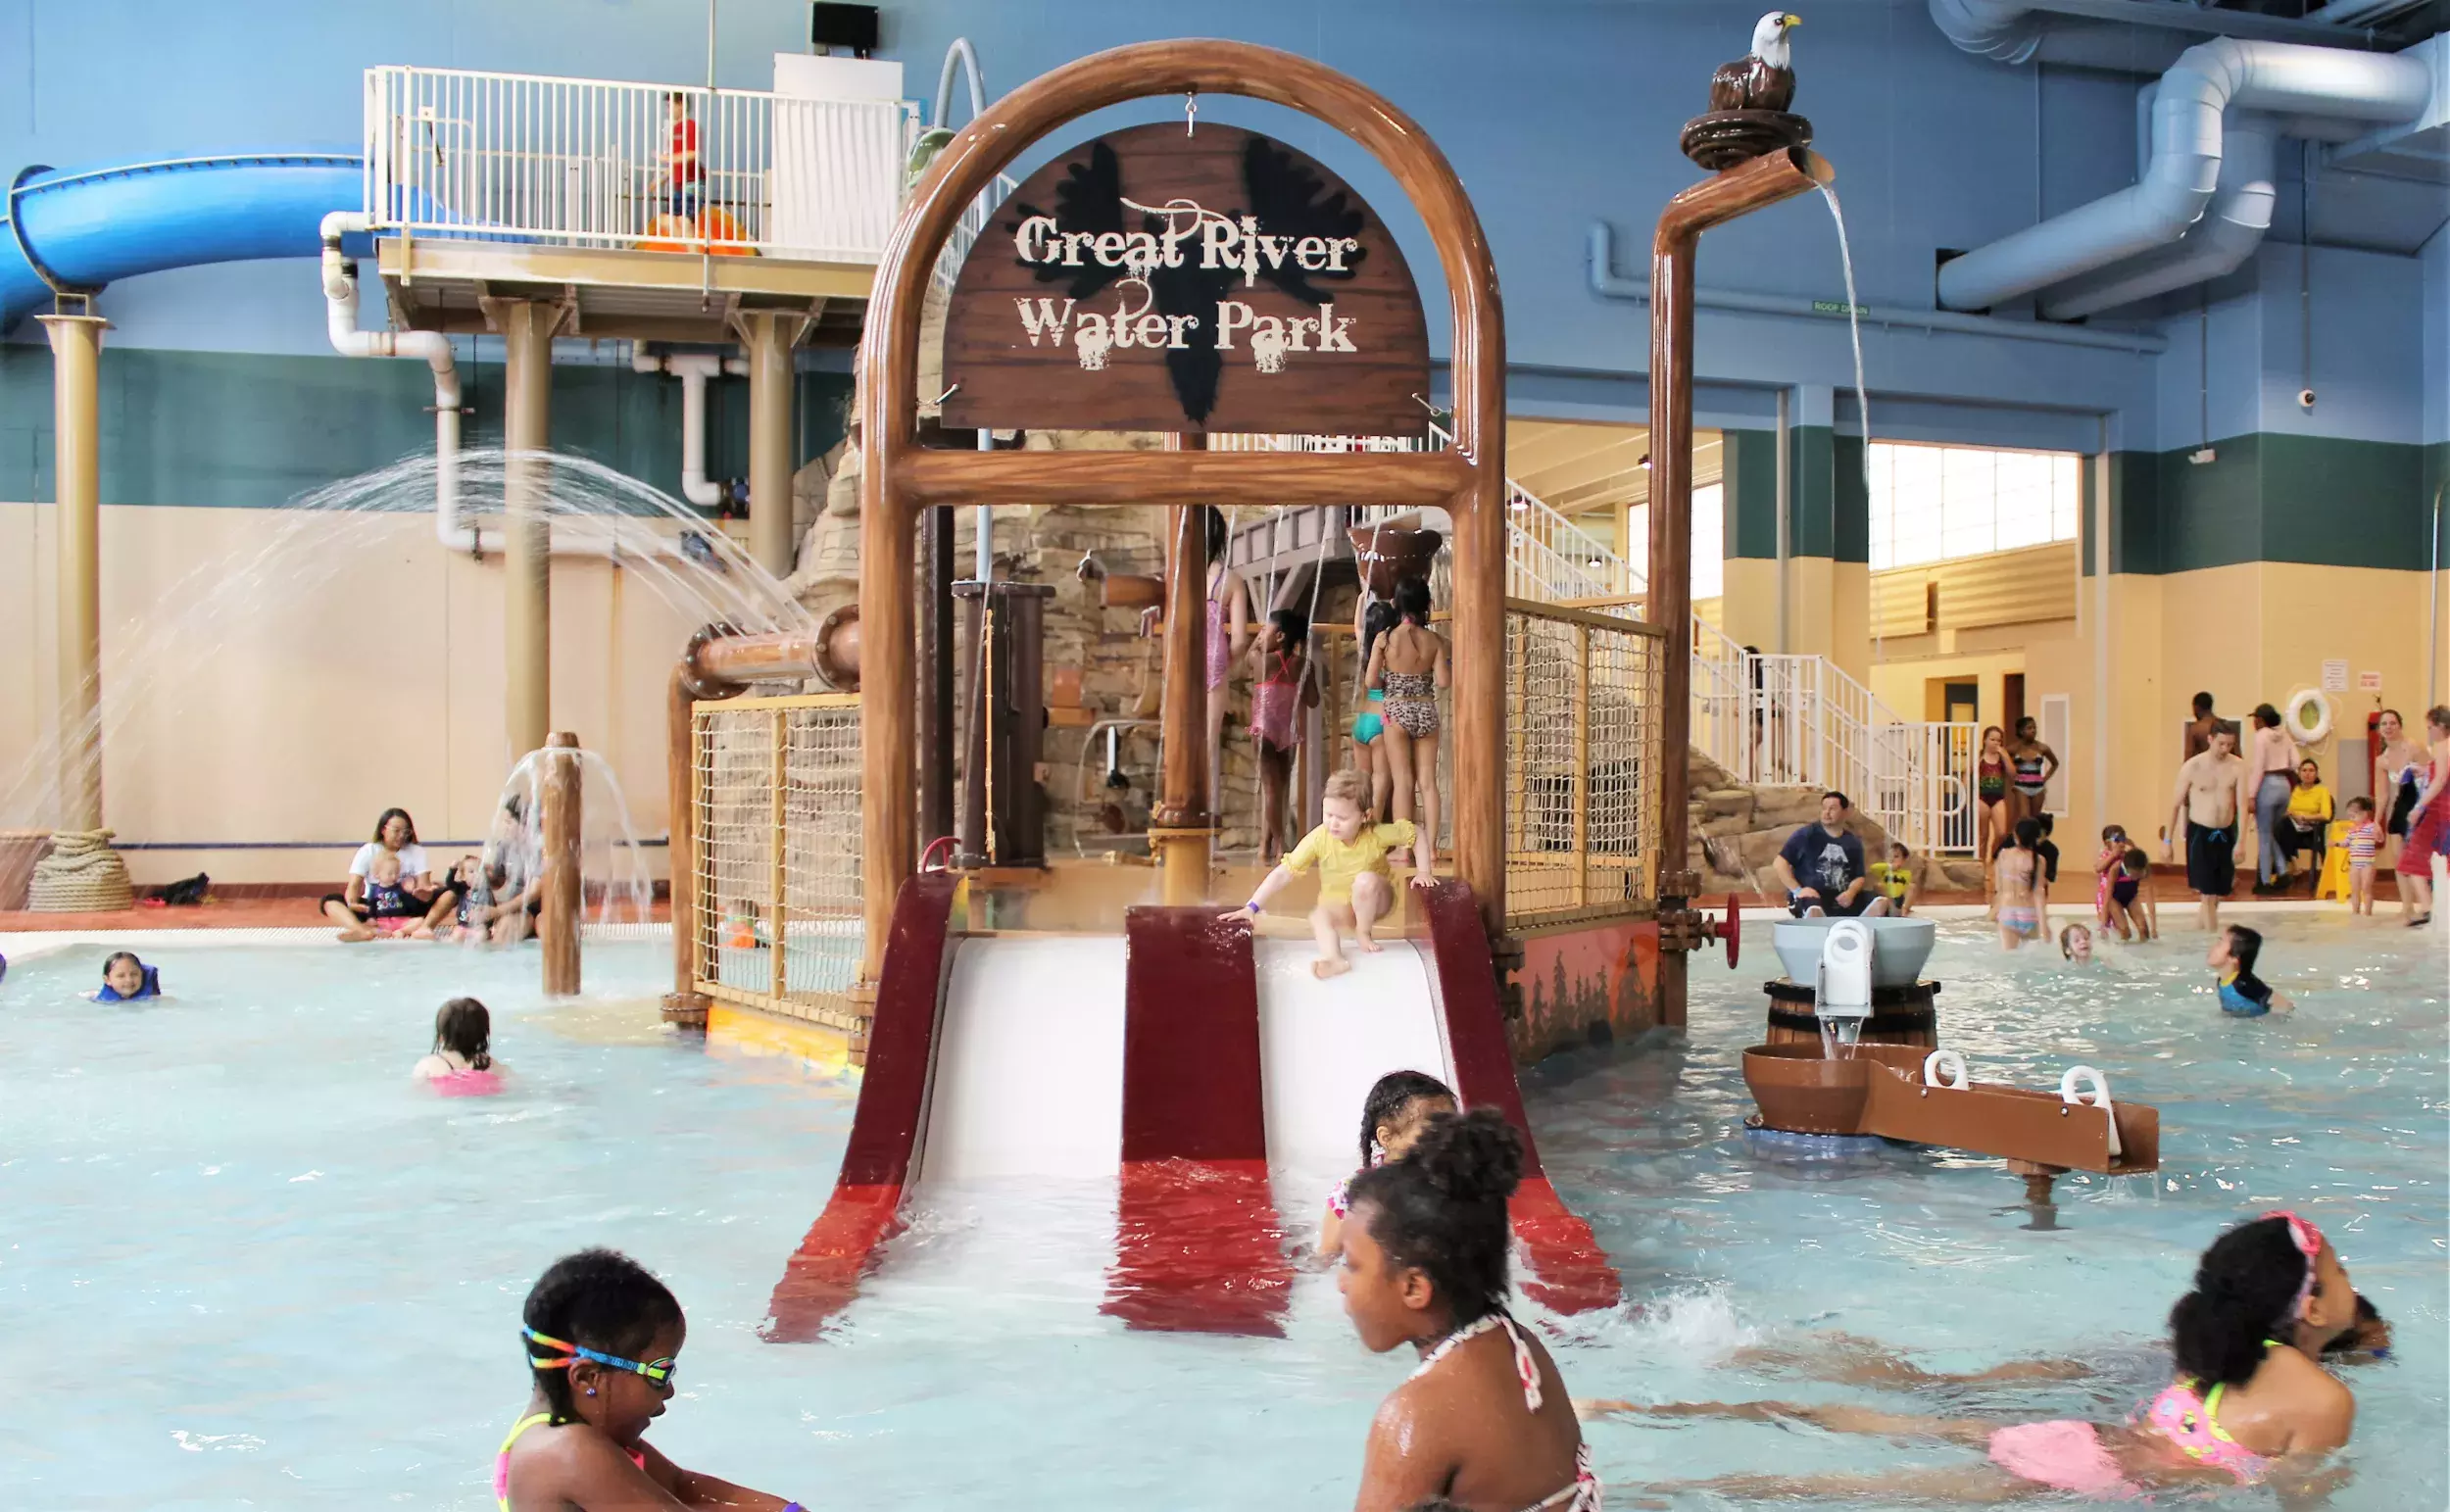 Great River Water Park Children's Pool